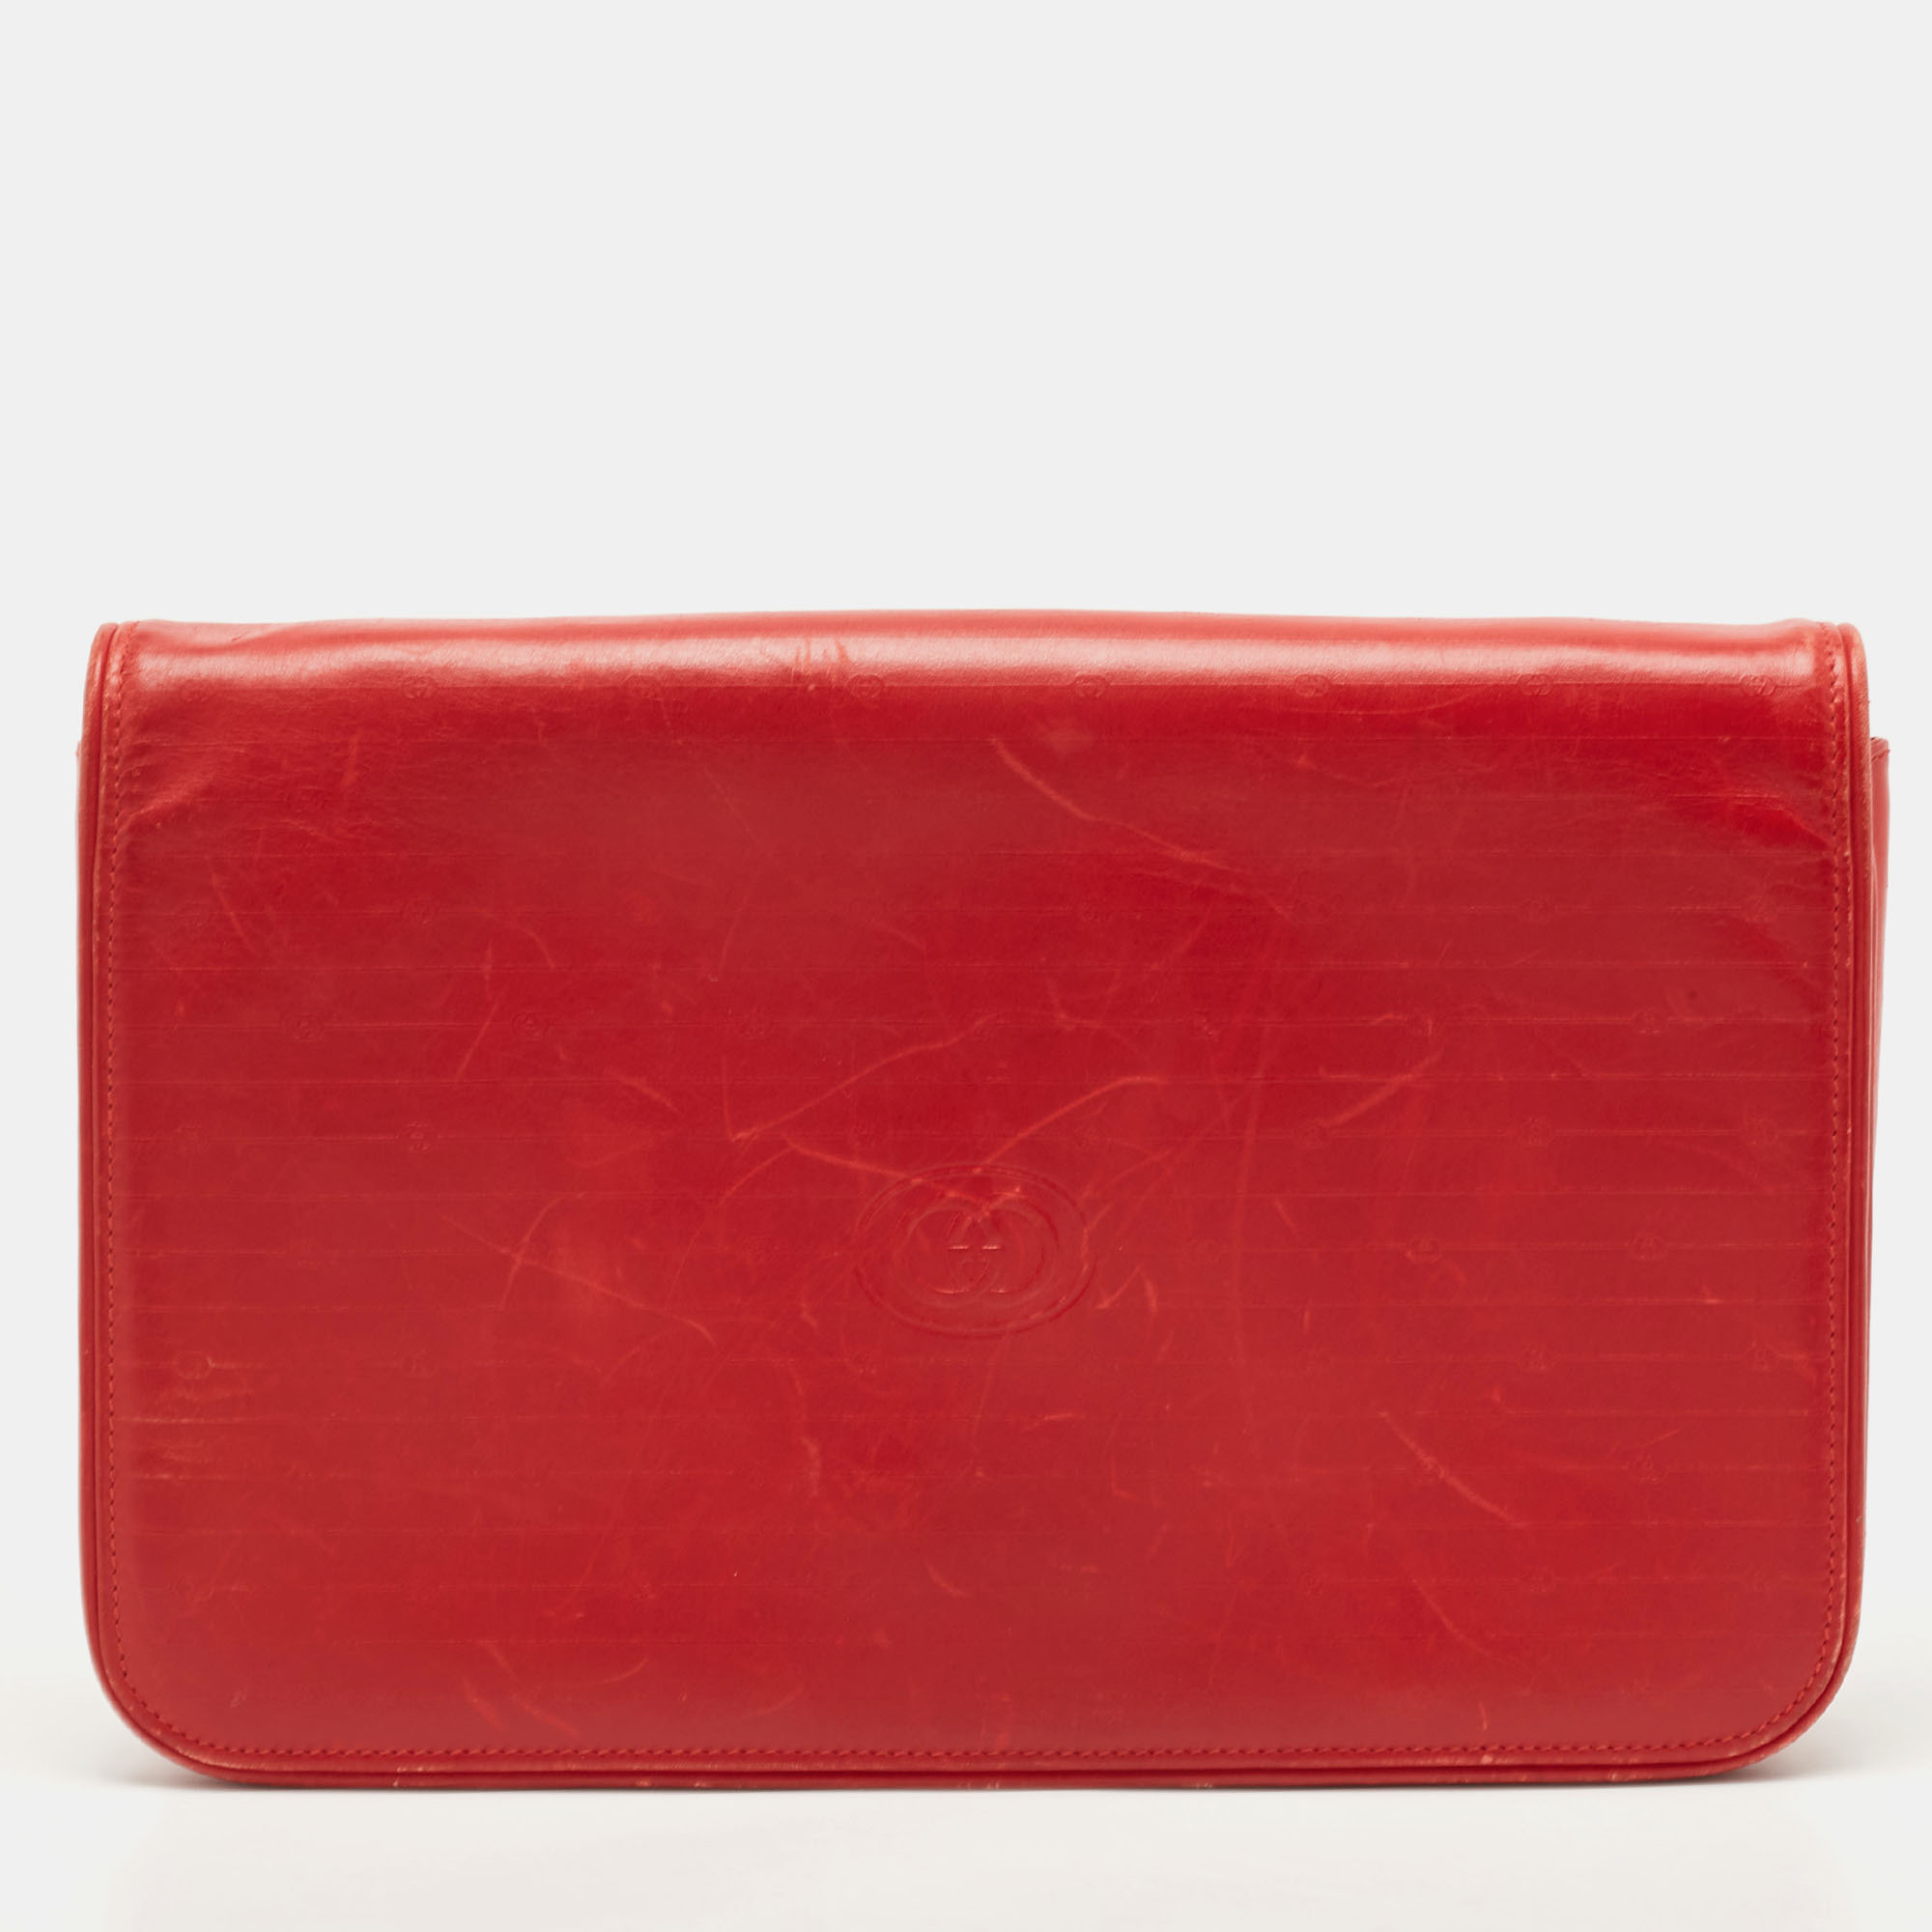 Gucci Red Leather Interlocking G Embossed Leather Flap Clutch